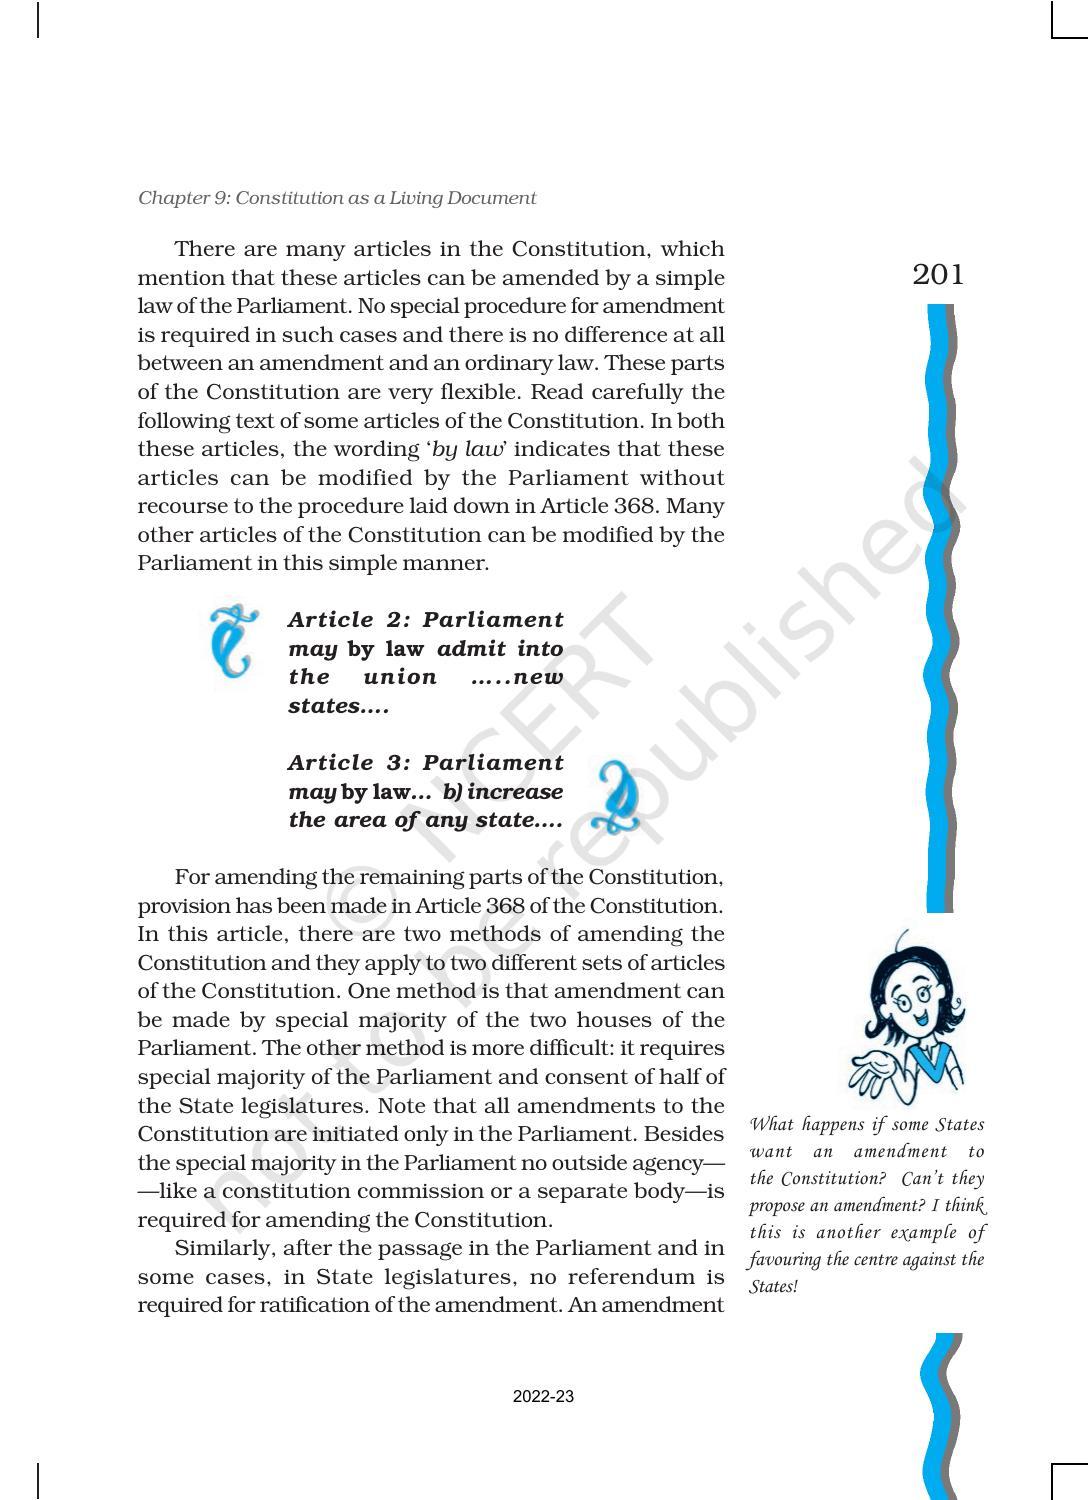 NCERT Book for Class 11 Political Science (Indian Constitution at Work) Chapter 9 Constitution as a Living Document - Page 6